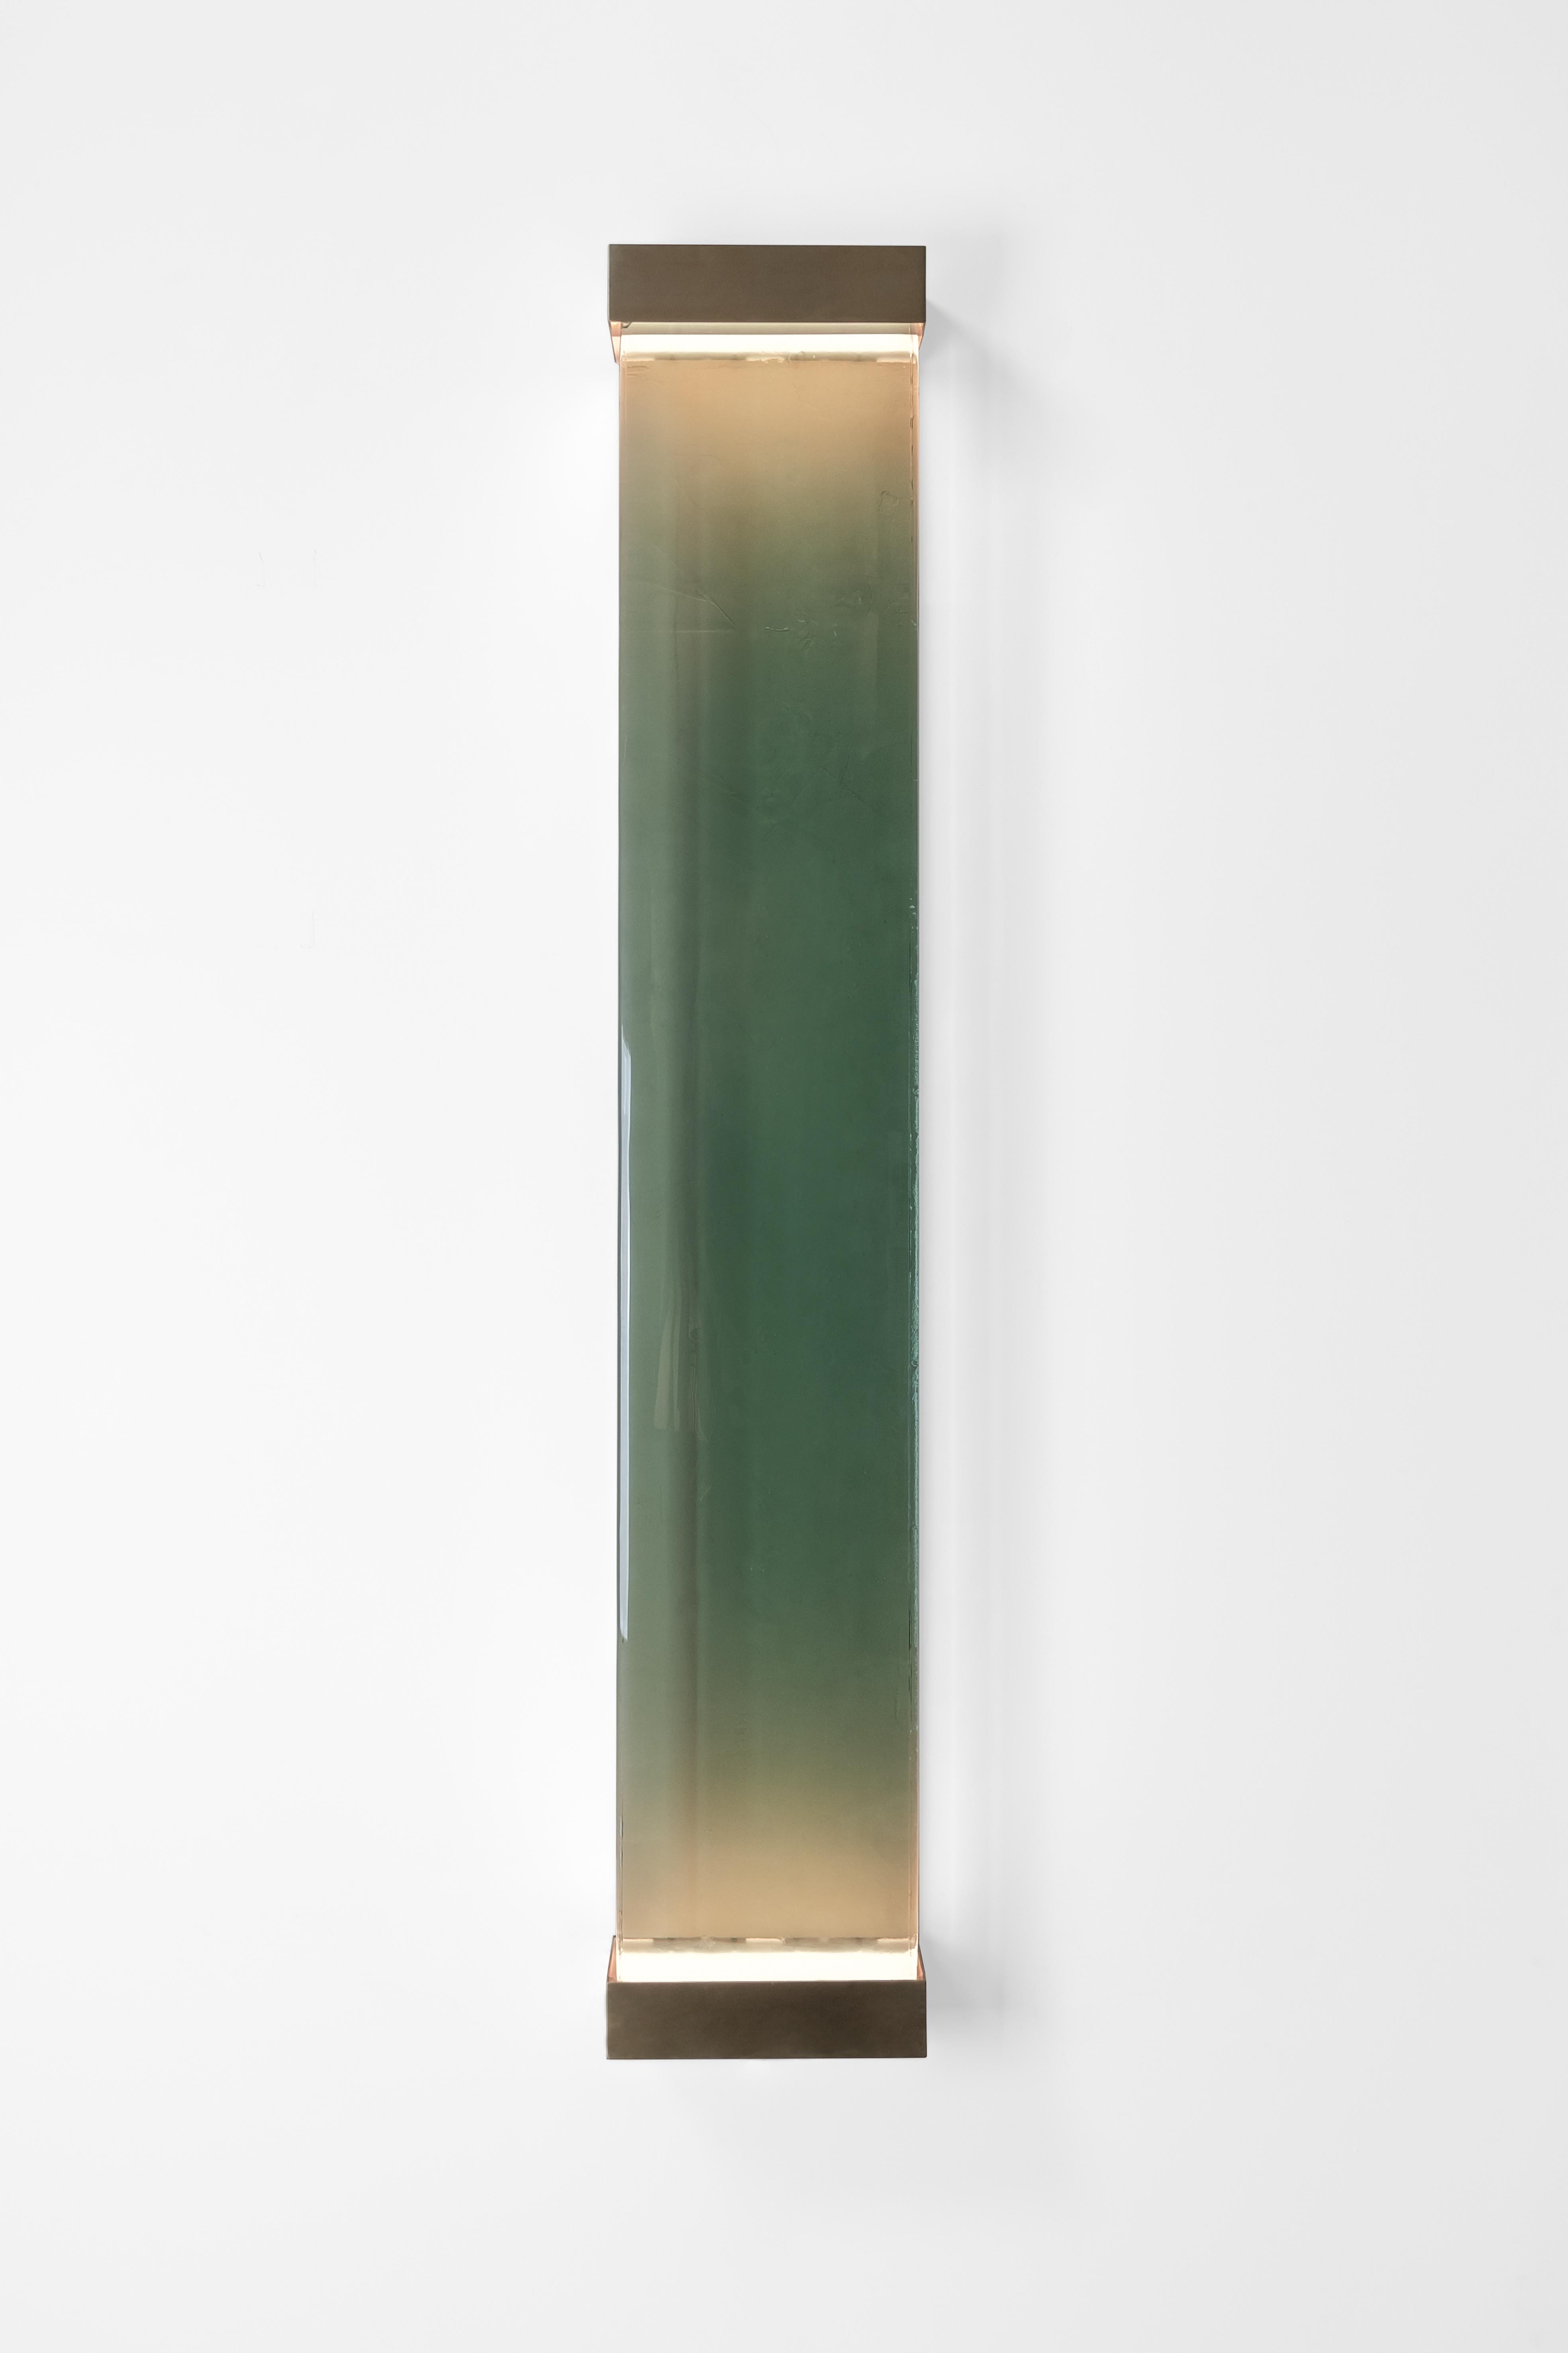 Jud wall lamp by Draga & Aurel
Dimensions: W 23, D 10, H 131
Materials: Resin and brass

All our lamps can be wired according to each country. If sold to the USA it will be wired for the USA for instance.

Inspired by minimalism, the Jud lamps are